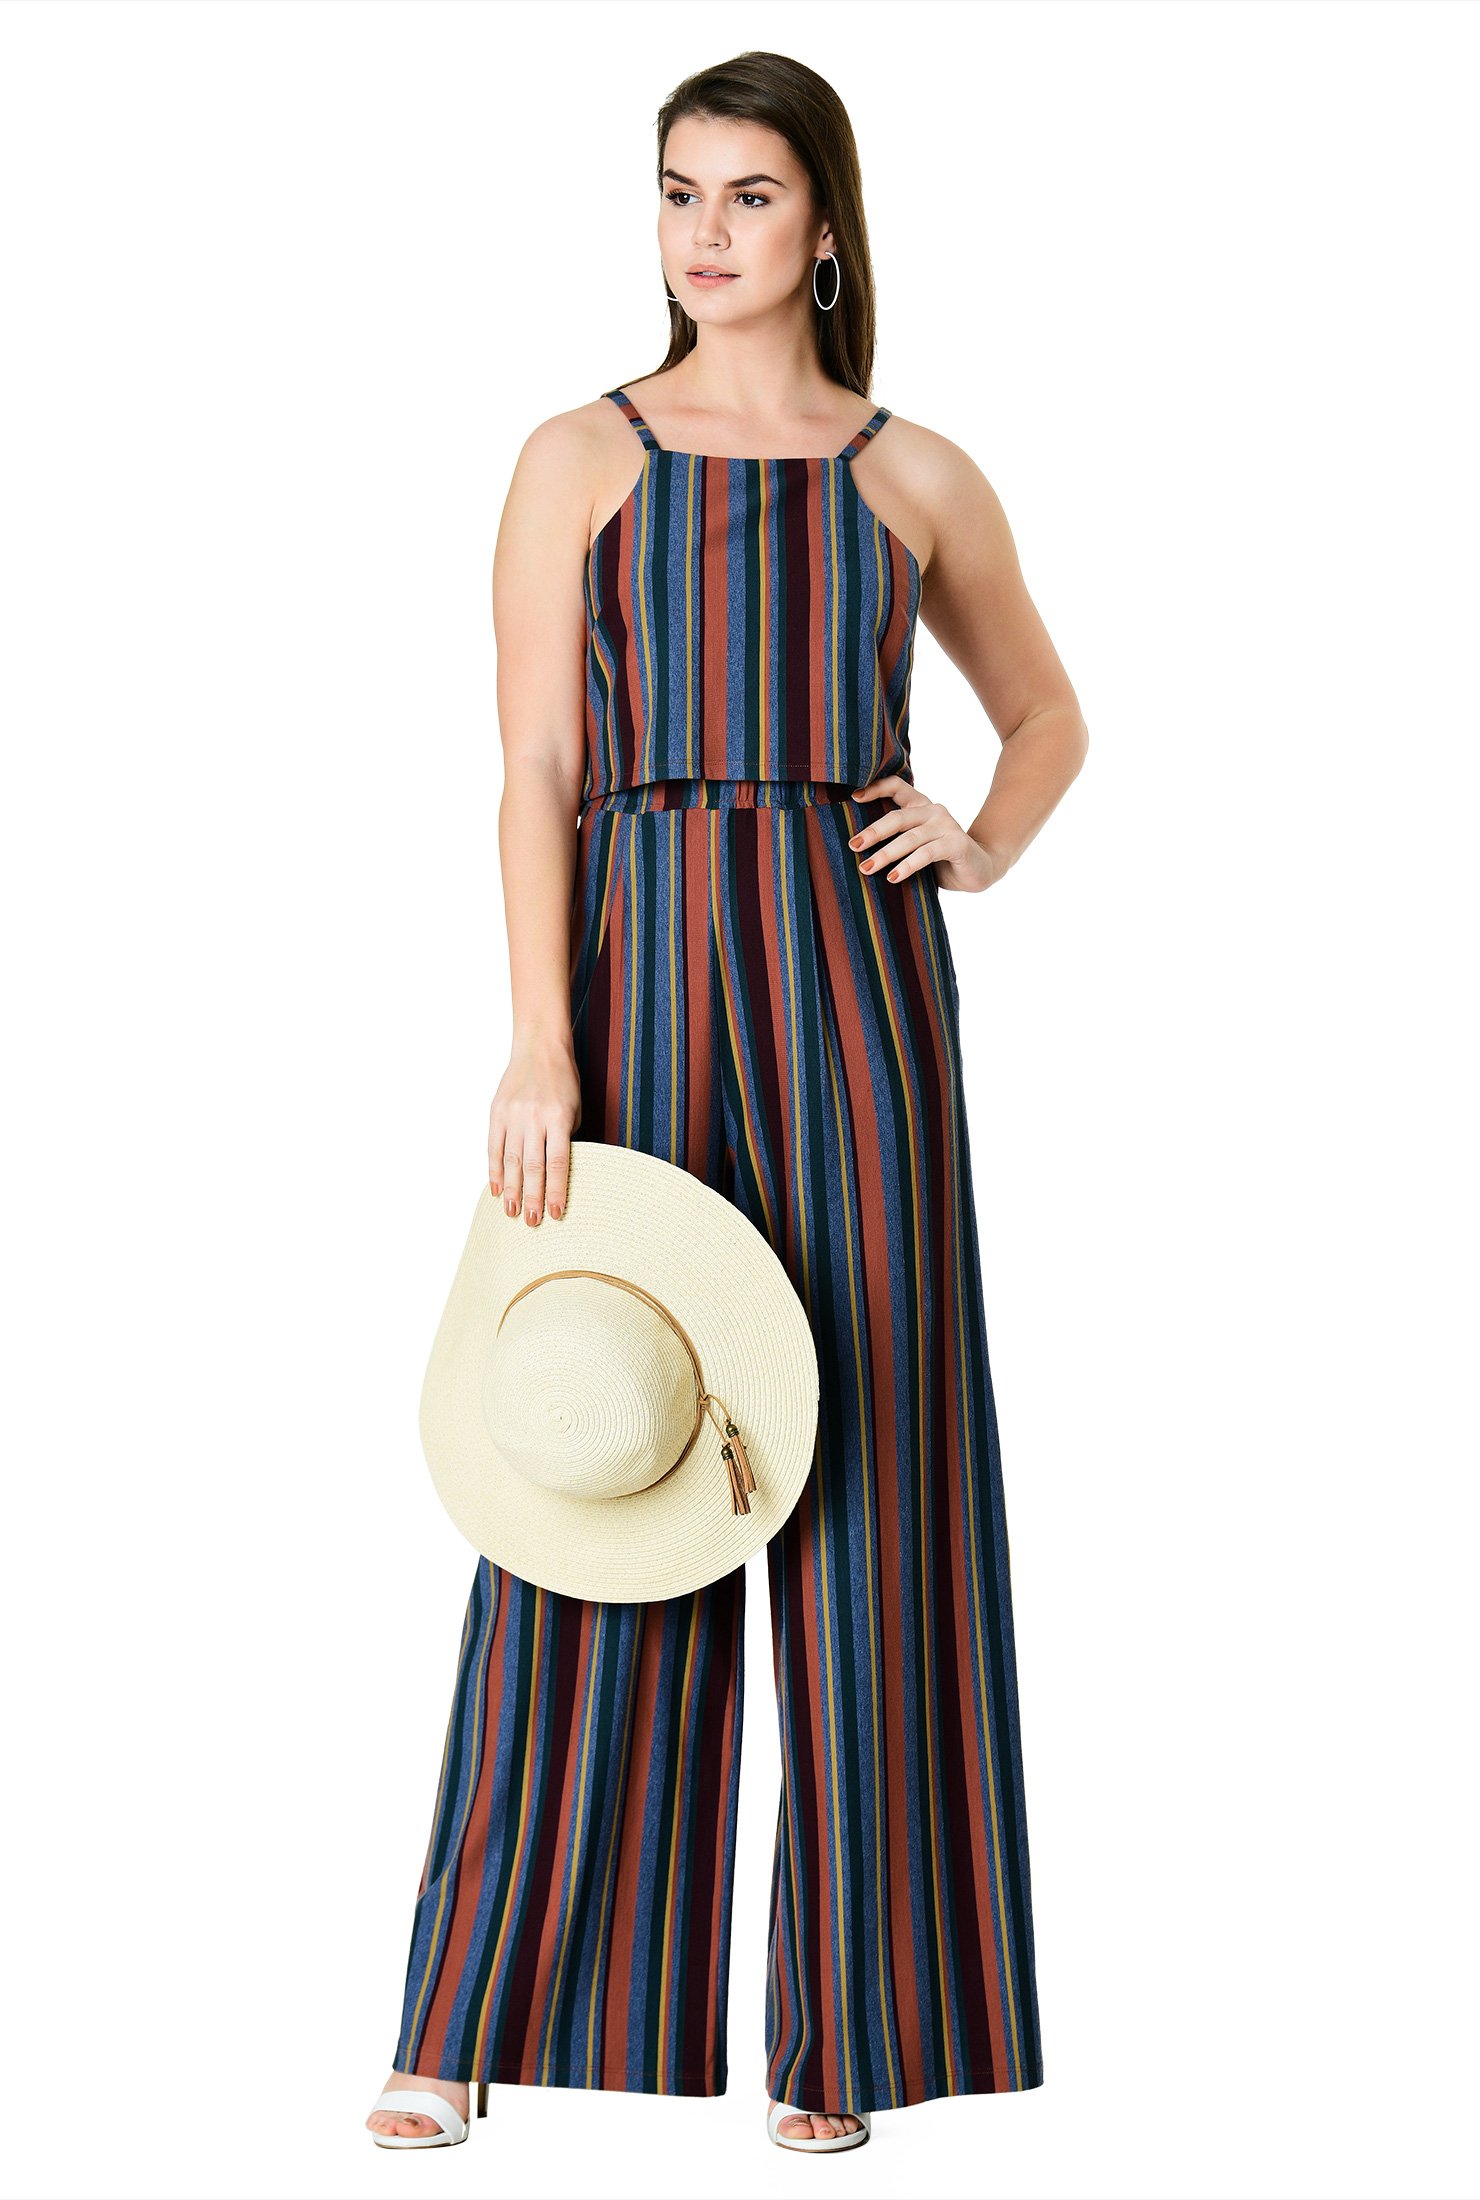 Stripe Cotton Knit Crop Top And Palazzo Pants Women S Clothing 0